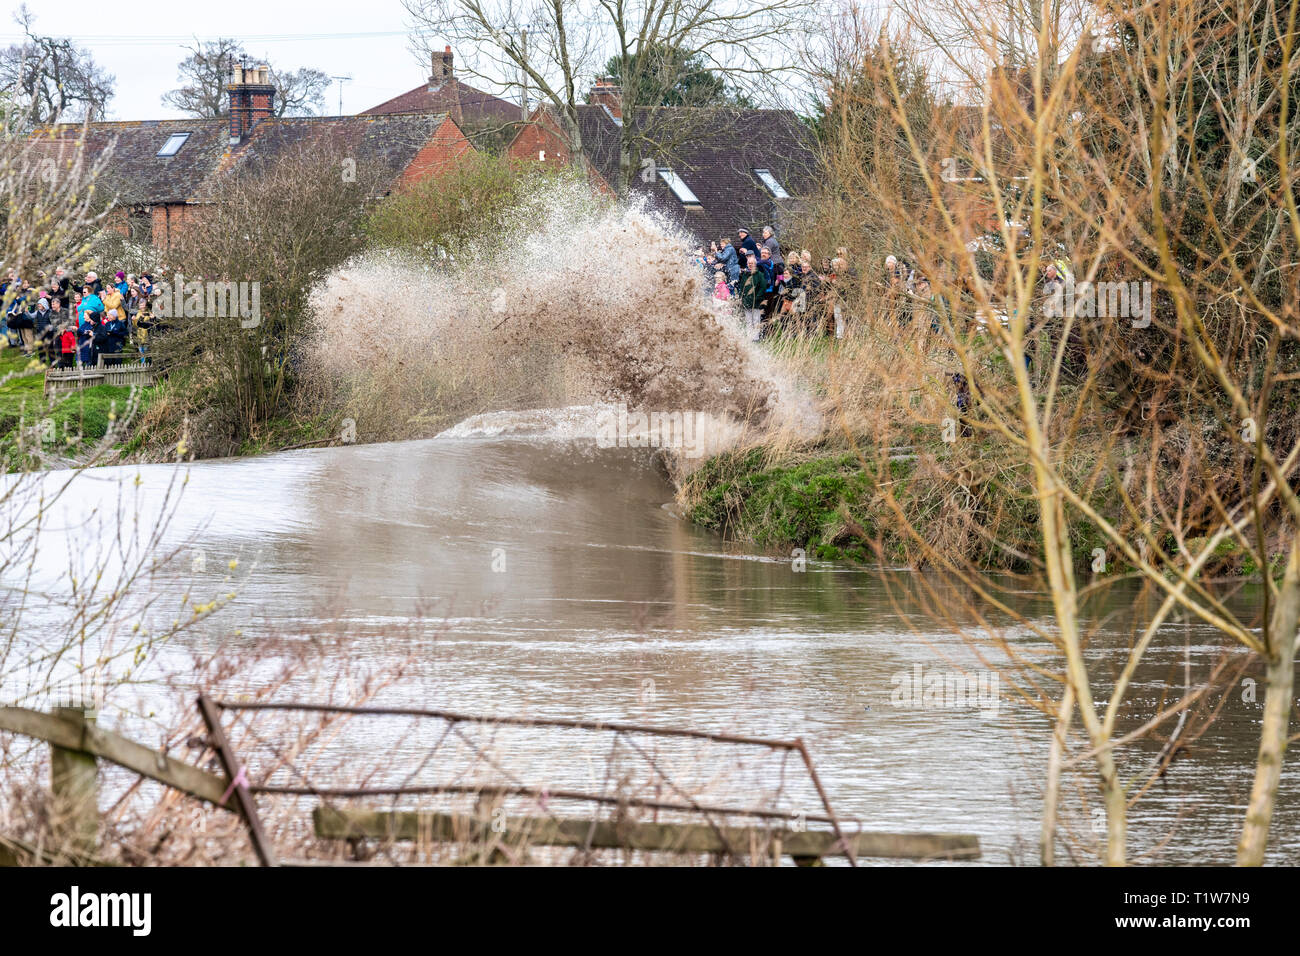 A 5 star Severn Bore on 22/3/2019 breaking against the bank and soaking onlookers at Minsterworth, Gloucestershire UK Stock Photo